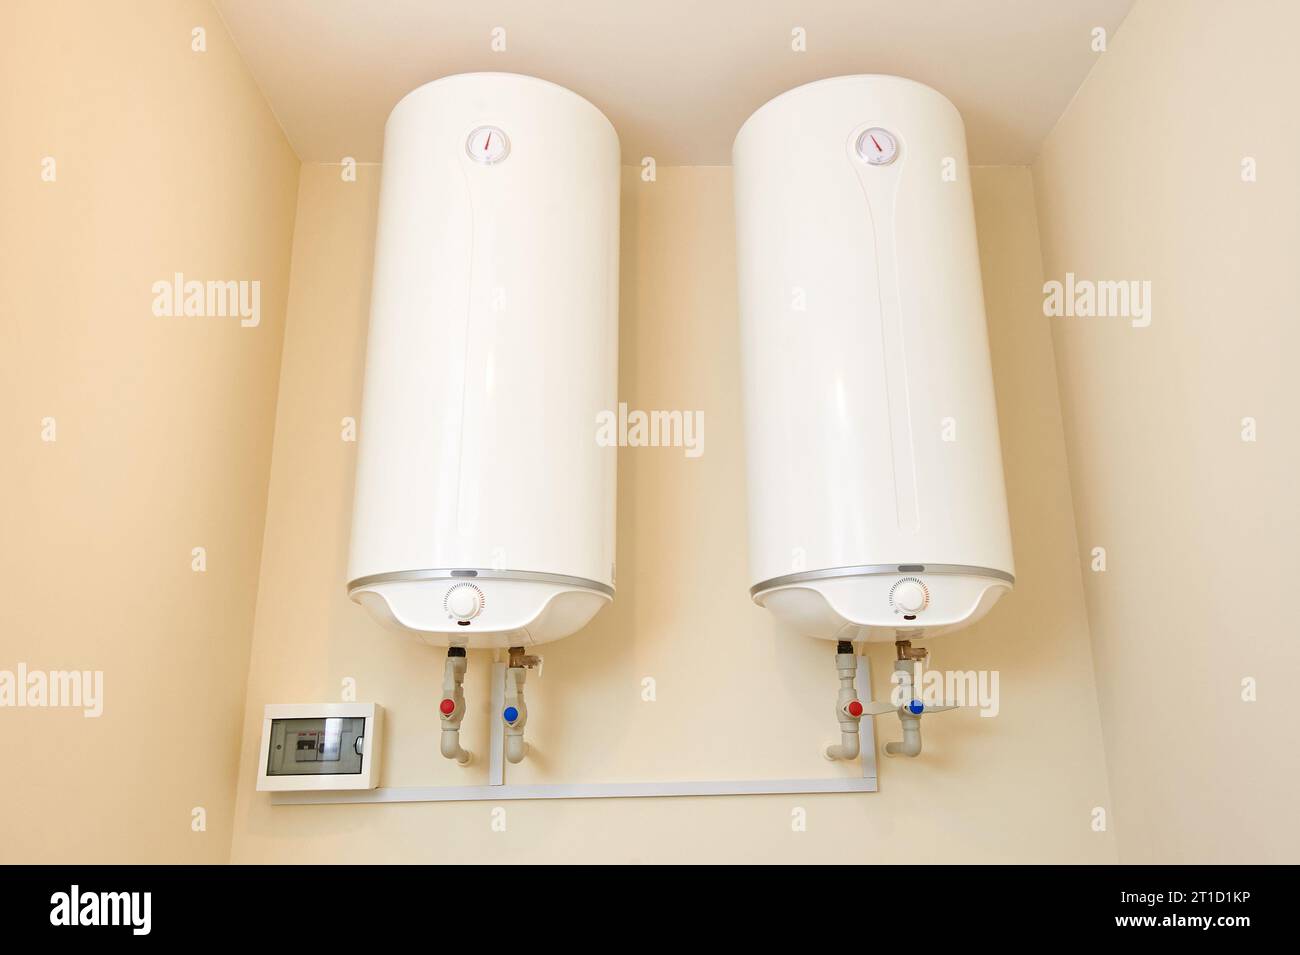 Two electric water heaters on the wall. Home wall mounted two water heating boilers. No people. Stock Photo